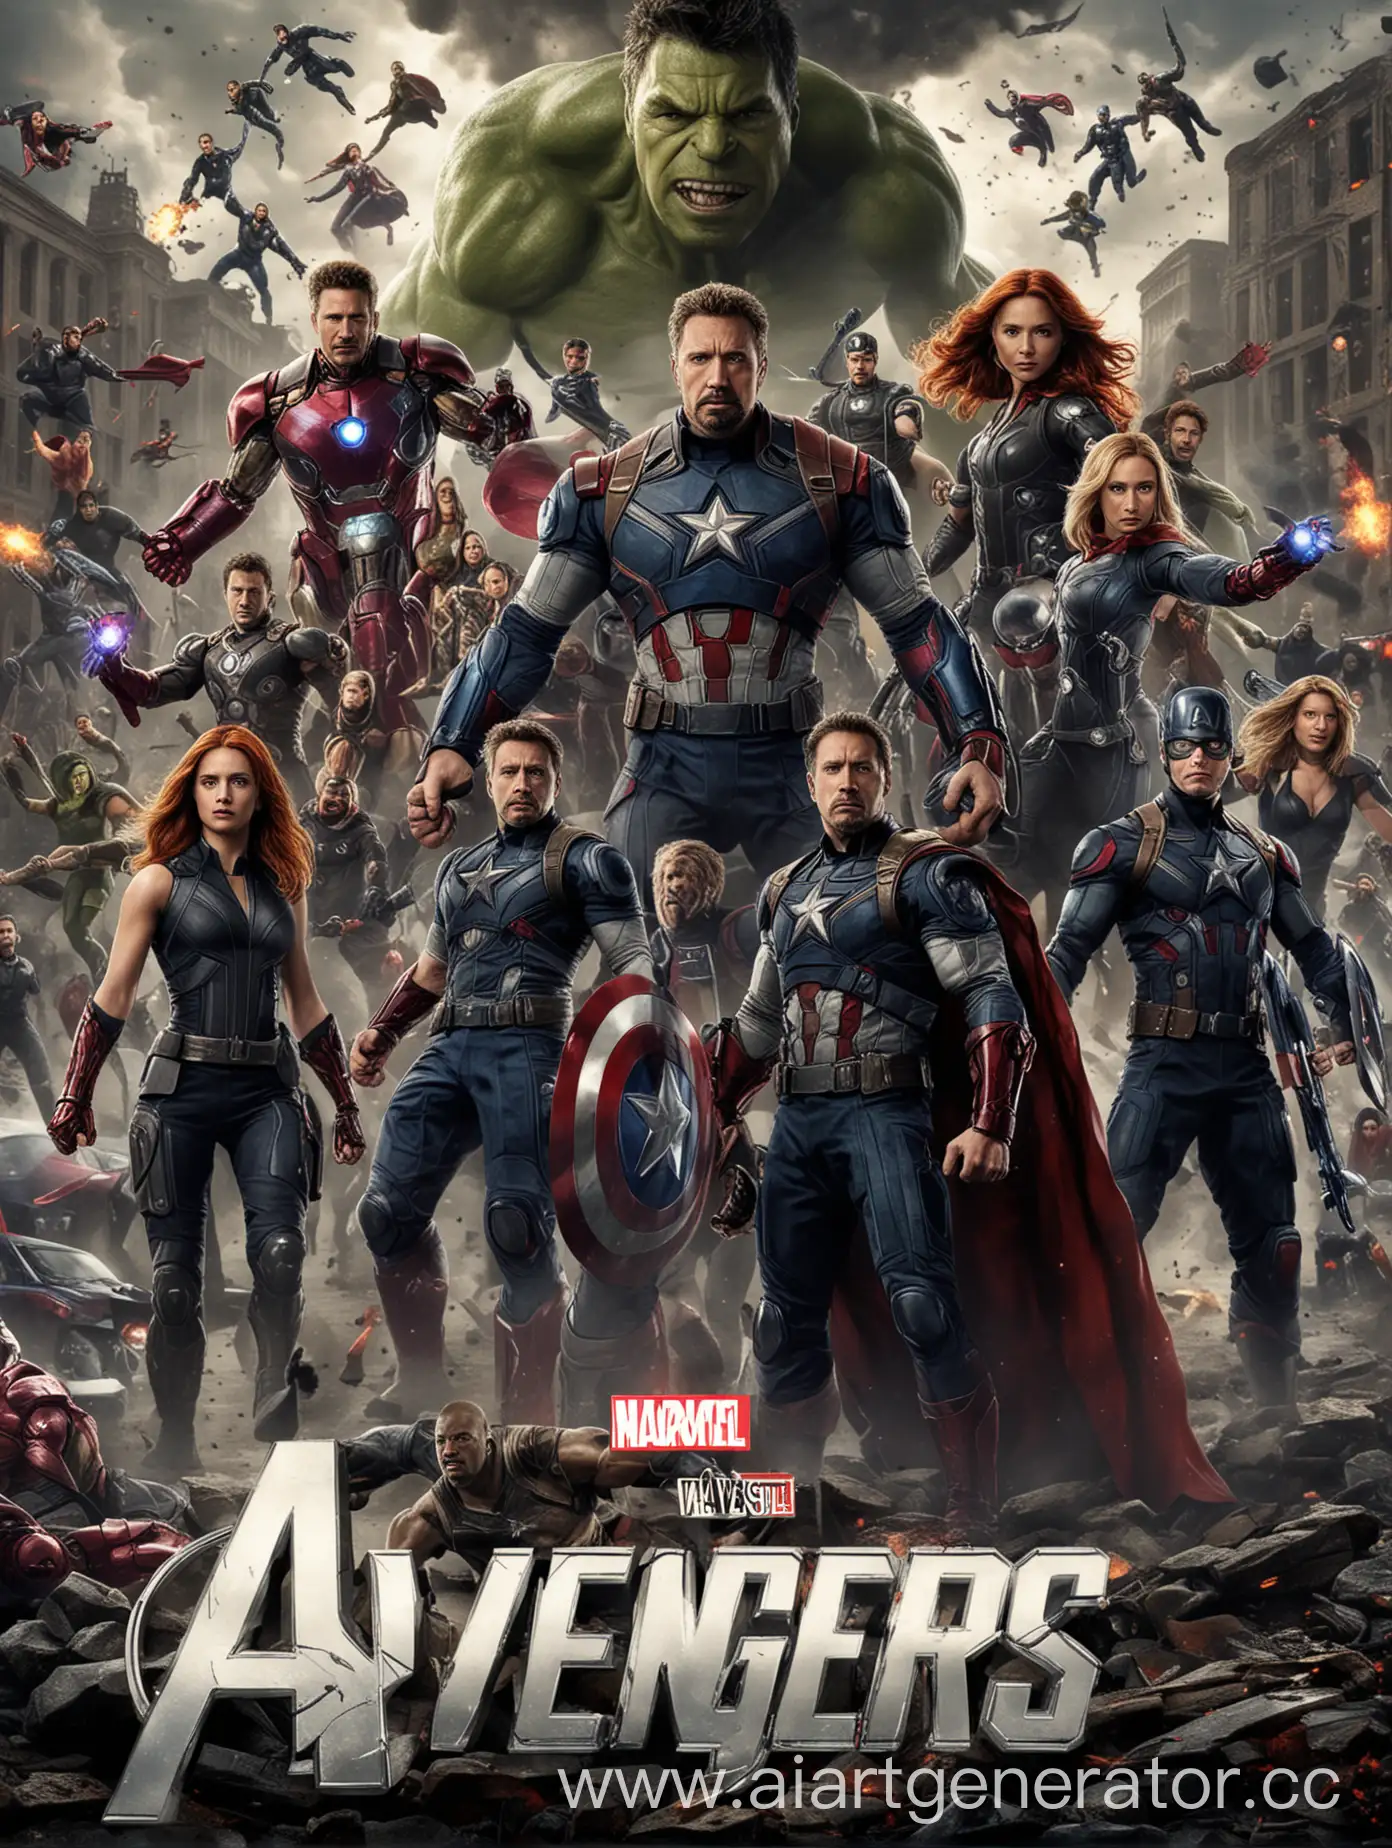 Avengers-Five-Poster-Unique-Assembly-of-Heroes-for-Epic-New-Adventure